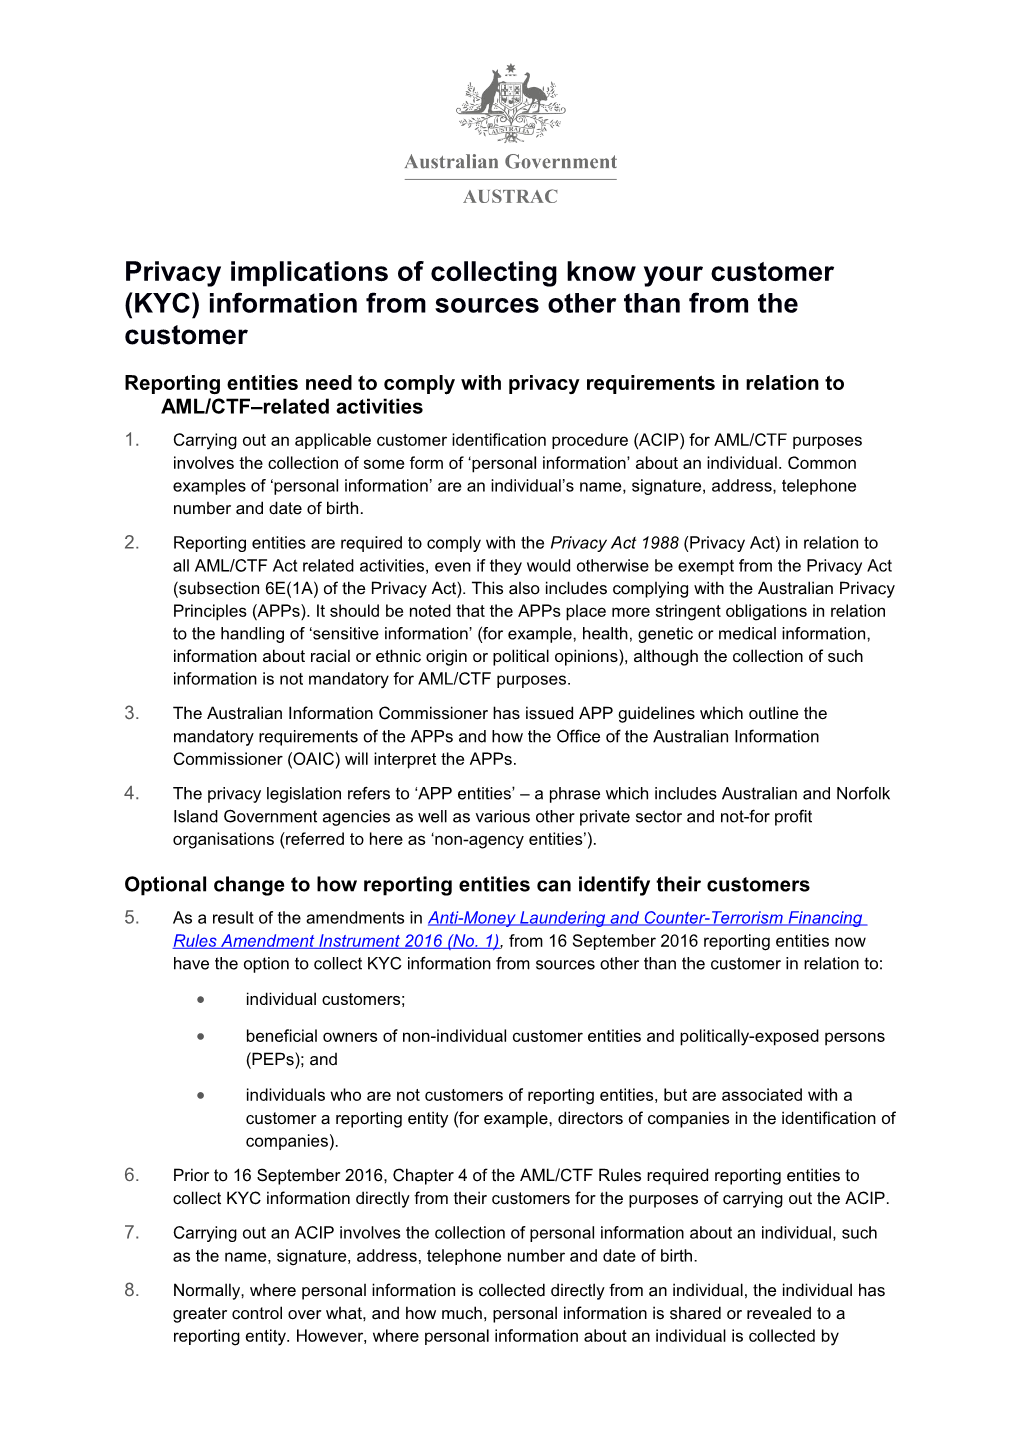 Privacy Implications of Collecting Know Your Customer (KYC) Information from Sources Other